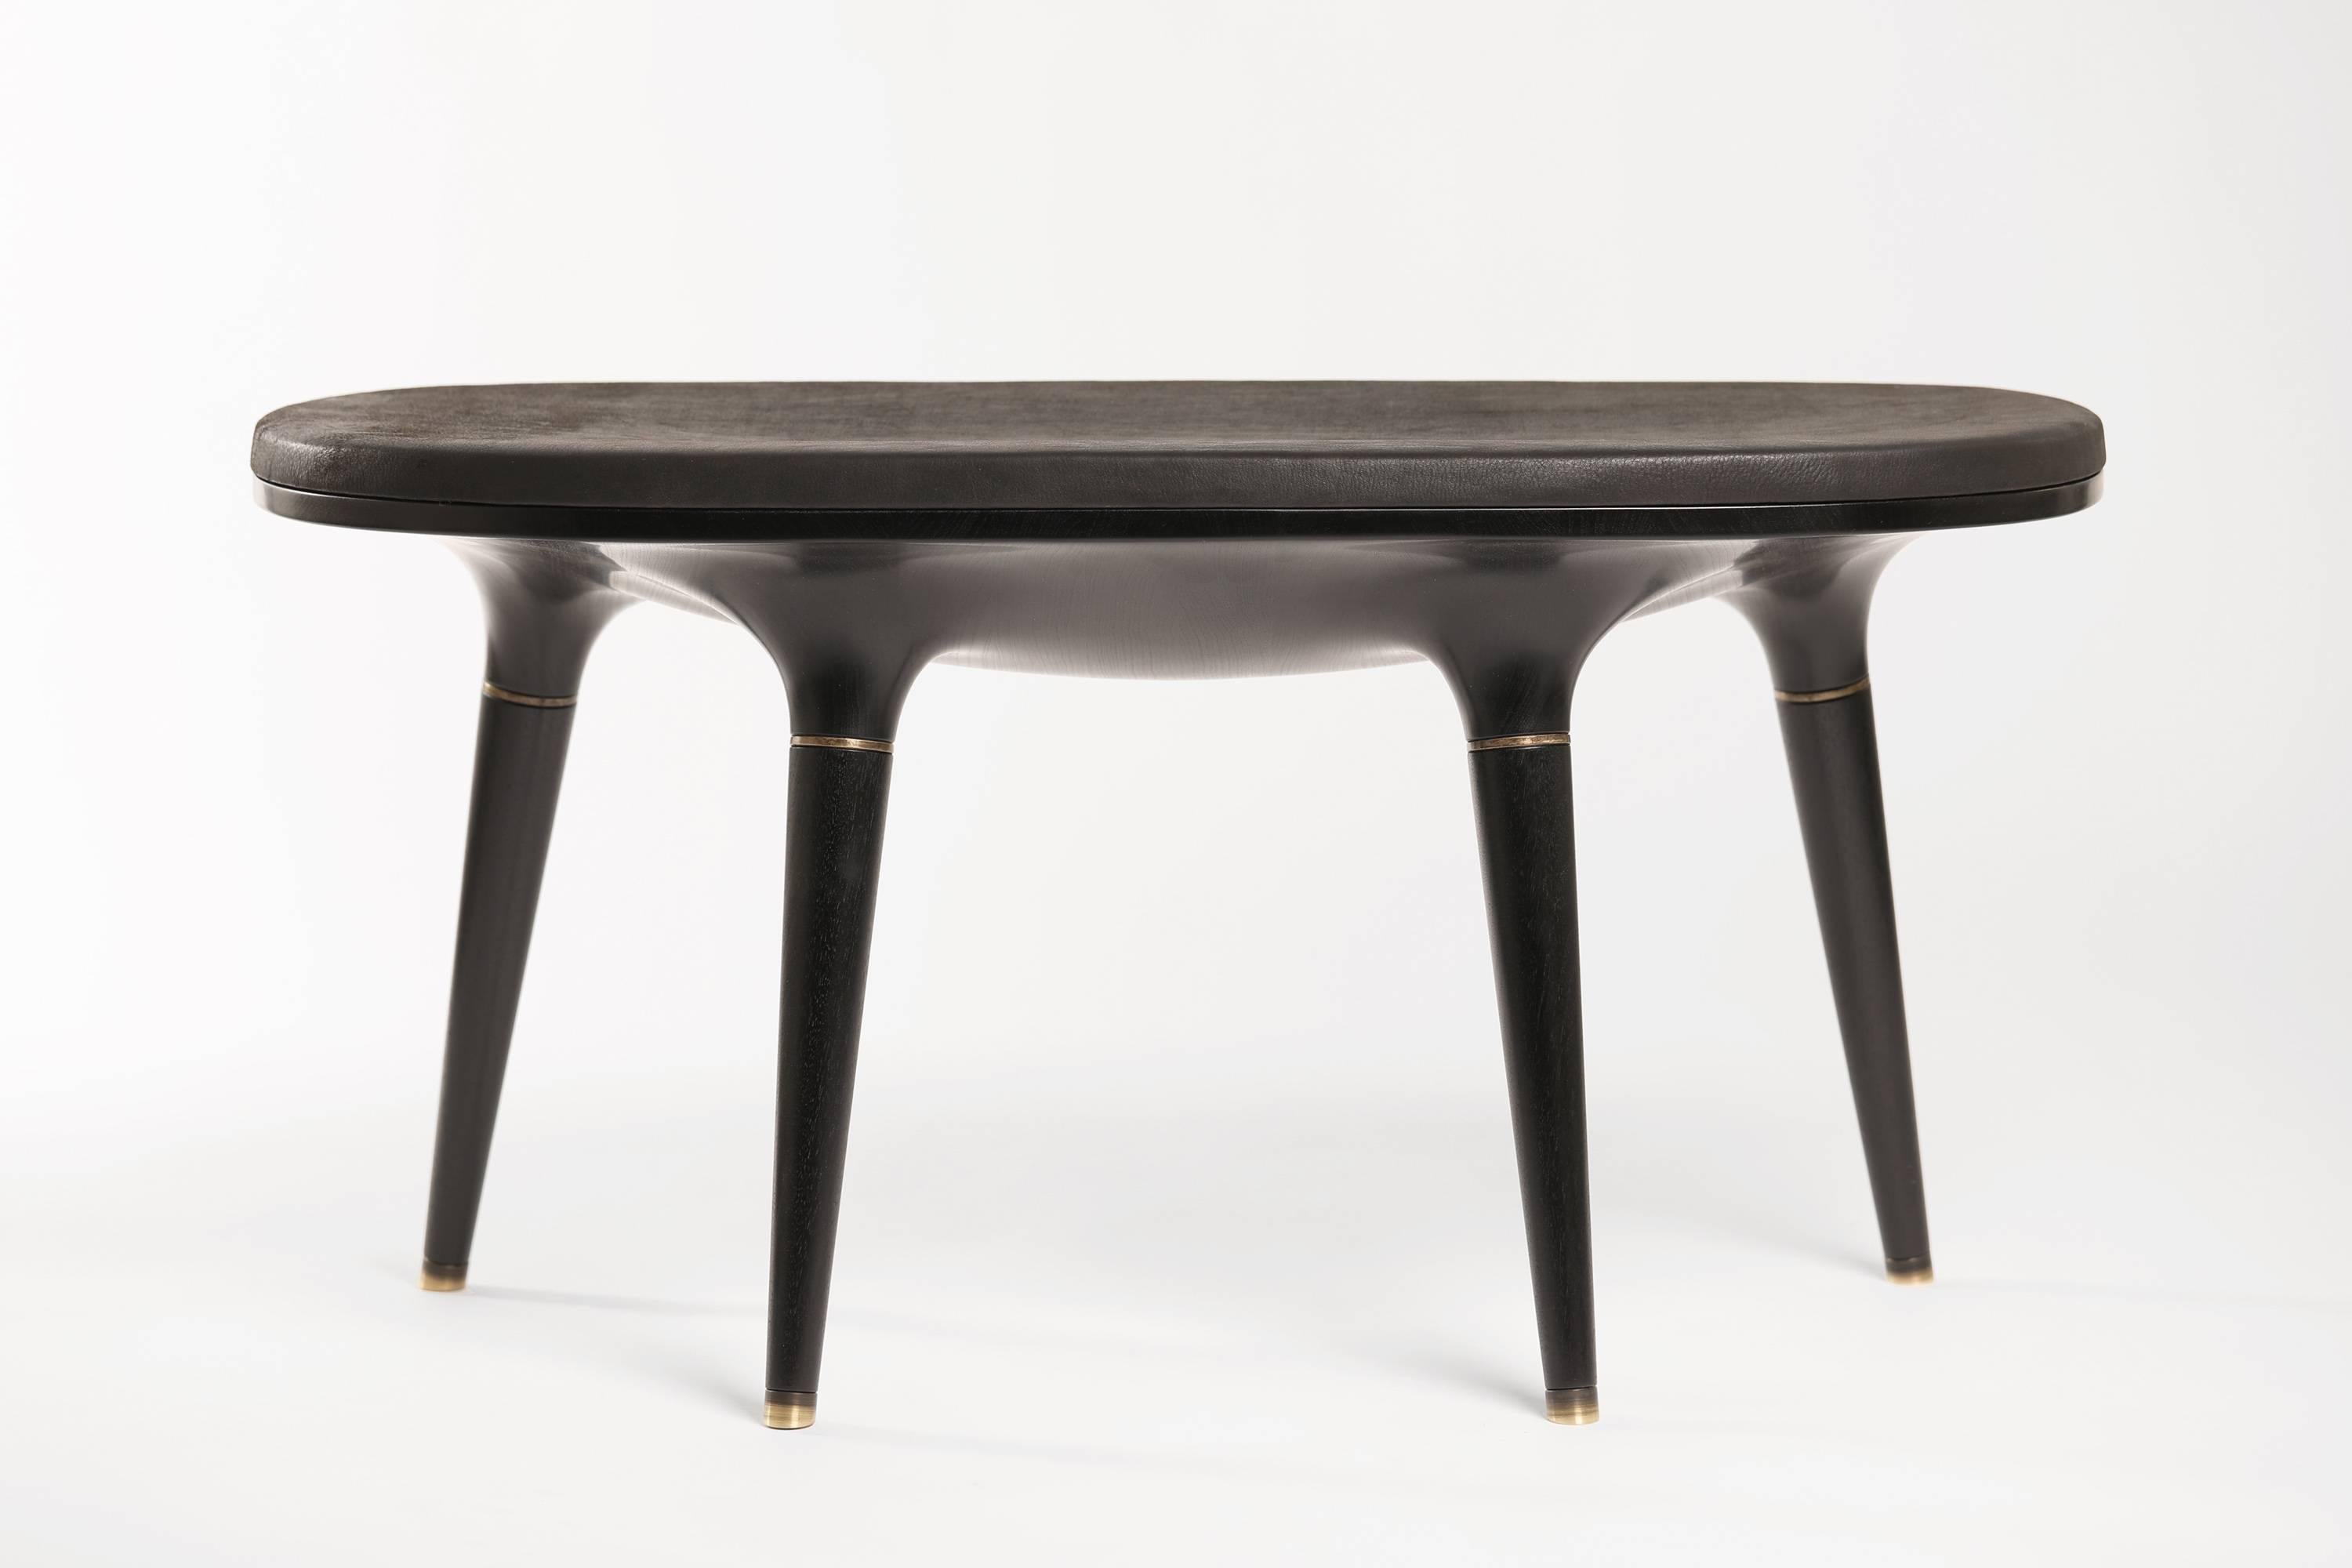 Ebonized Bench001 from series 001 by Vincent Pocsik.

Carved walnut bench with leather cushion top and brass accents. Shown here in ebonized finish.

Vincent Pocsik finds the balance between old and new fabrication techniques working in conjunction